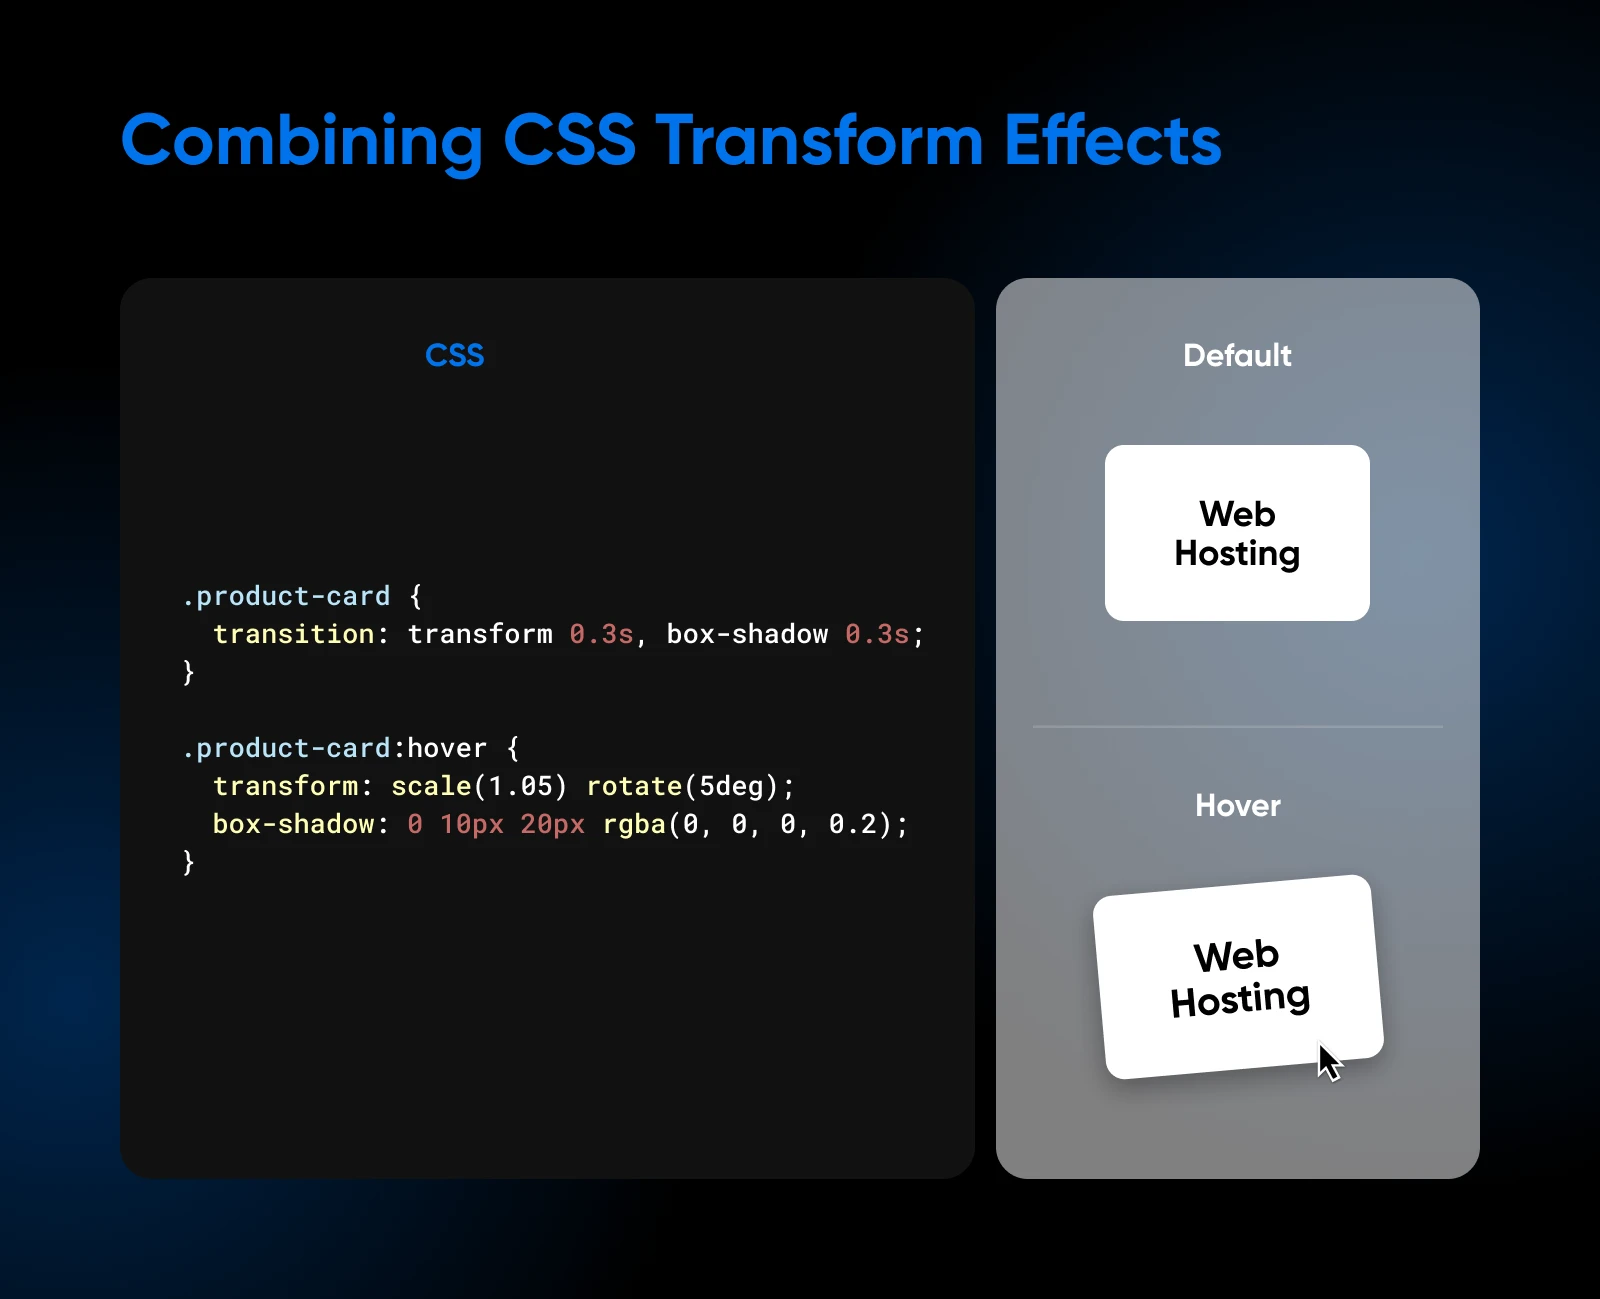 Code for combining CSS transform effects on the left, and the default vs. hover designs for the product card on the right. 